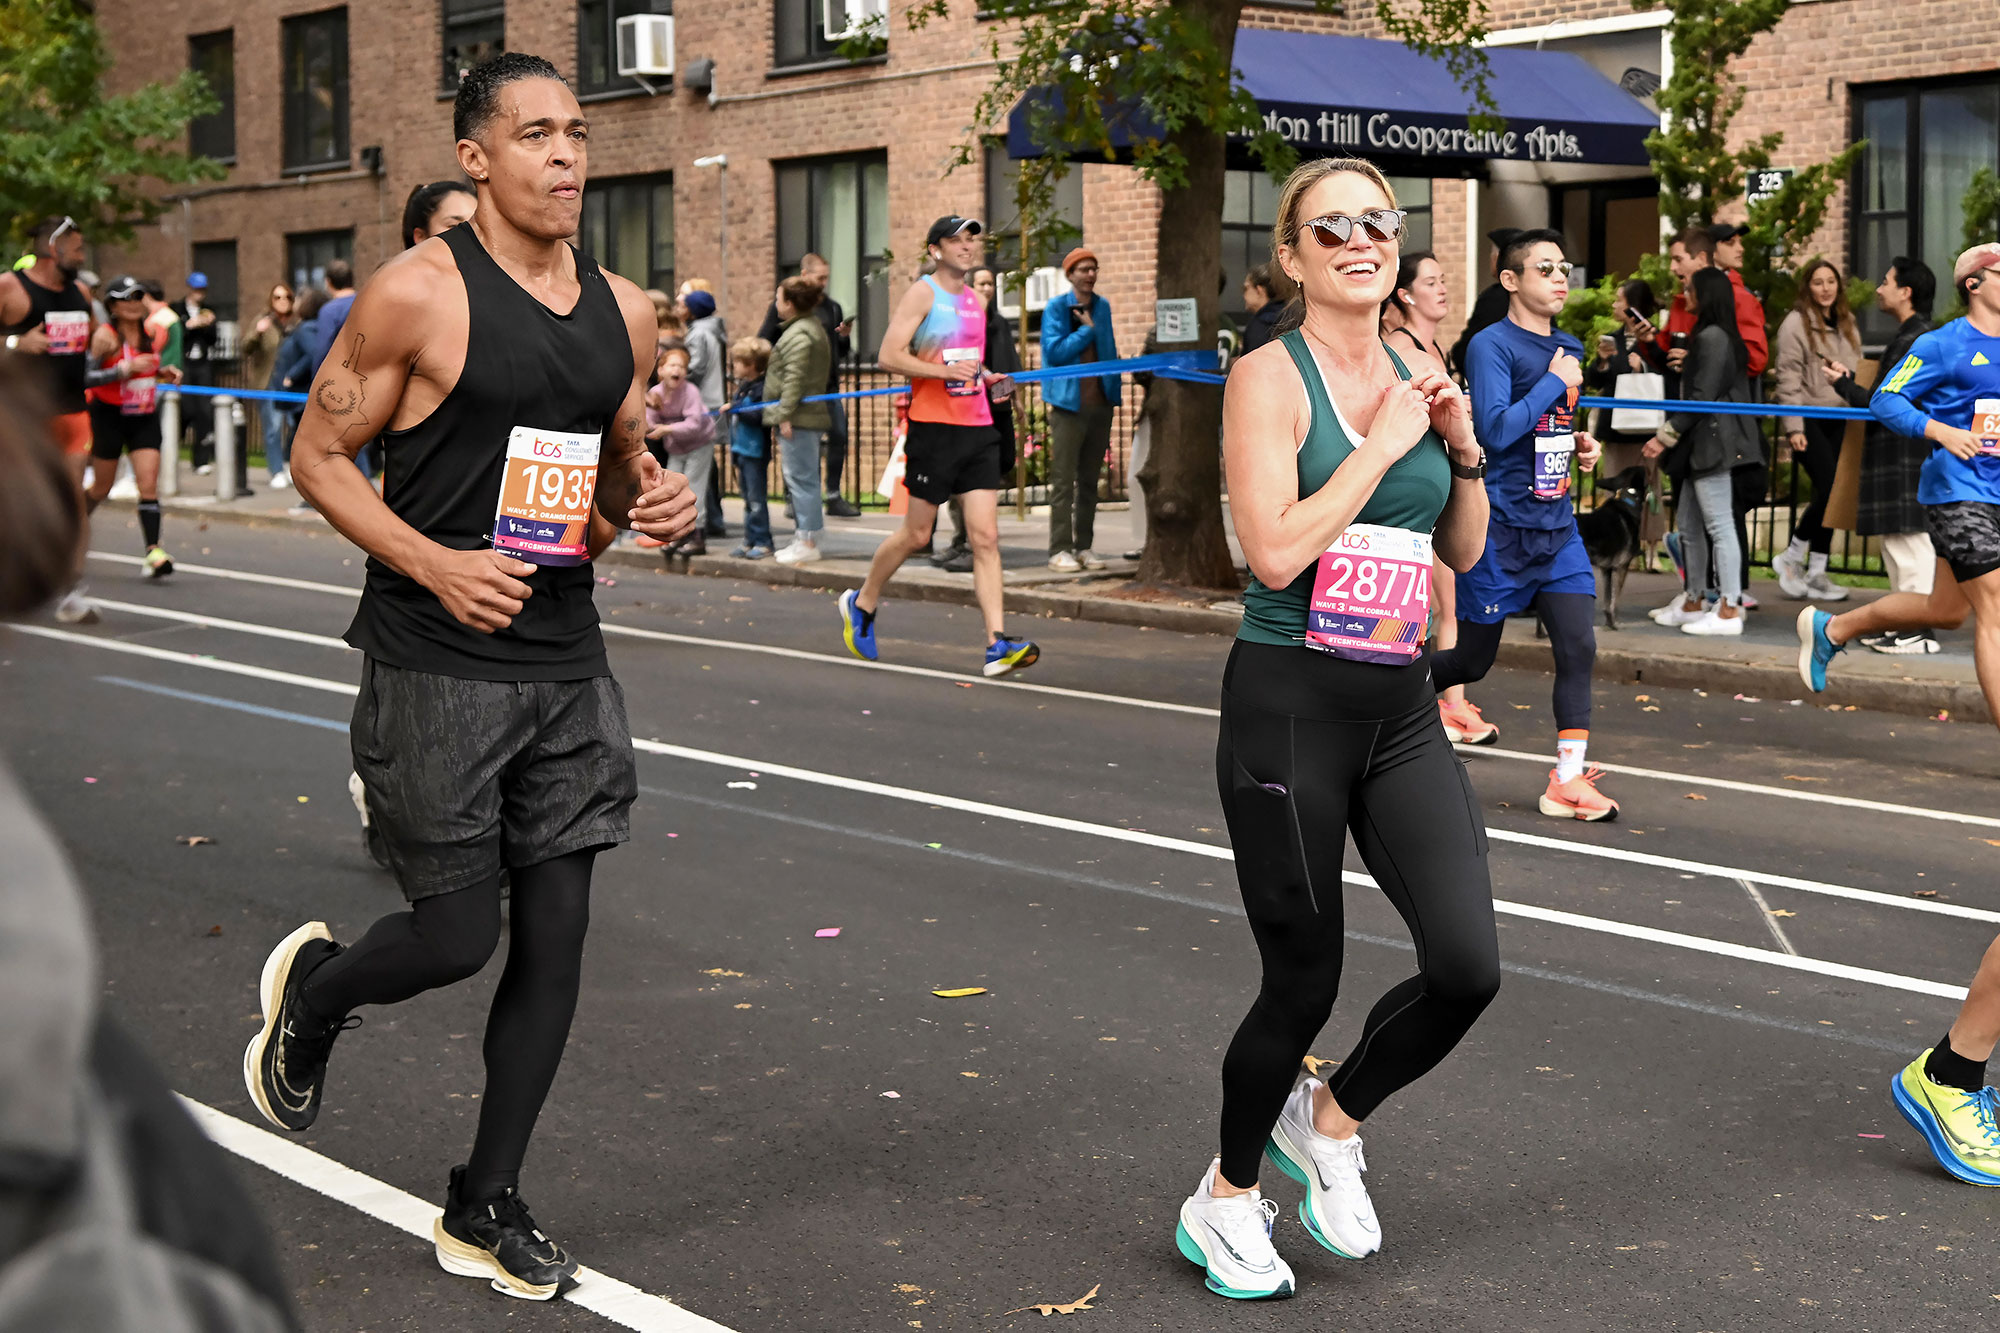 Amy Robach and T.J. Holmes Run the NYC Marathon 1 Year After Scandal